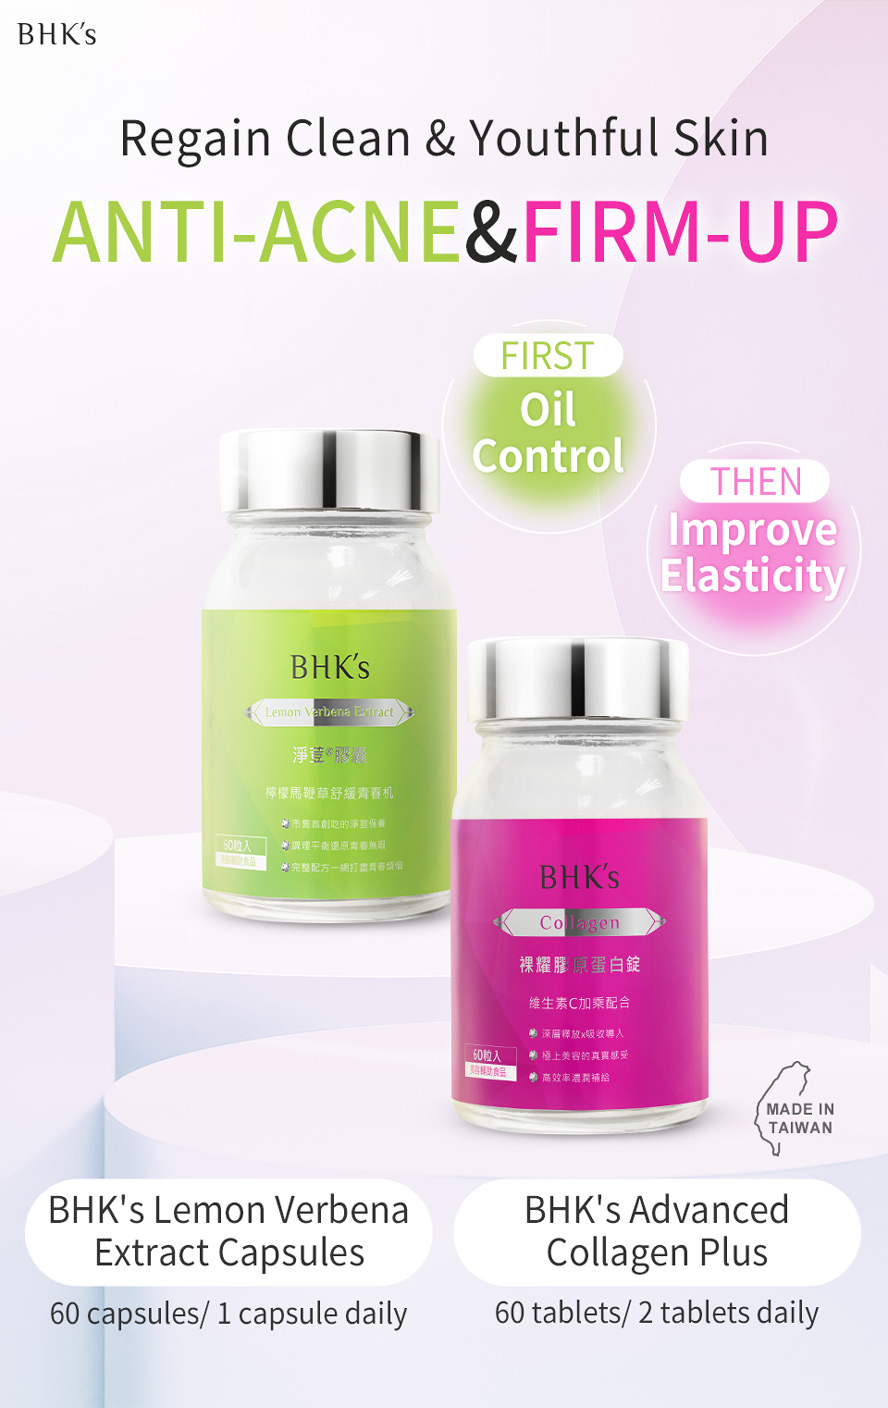 BHK's Advance Collagen Plus + Lemon Verbena Extract can promote oil-control anti-acne purpose and enhance skin elasticity.